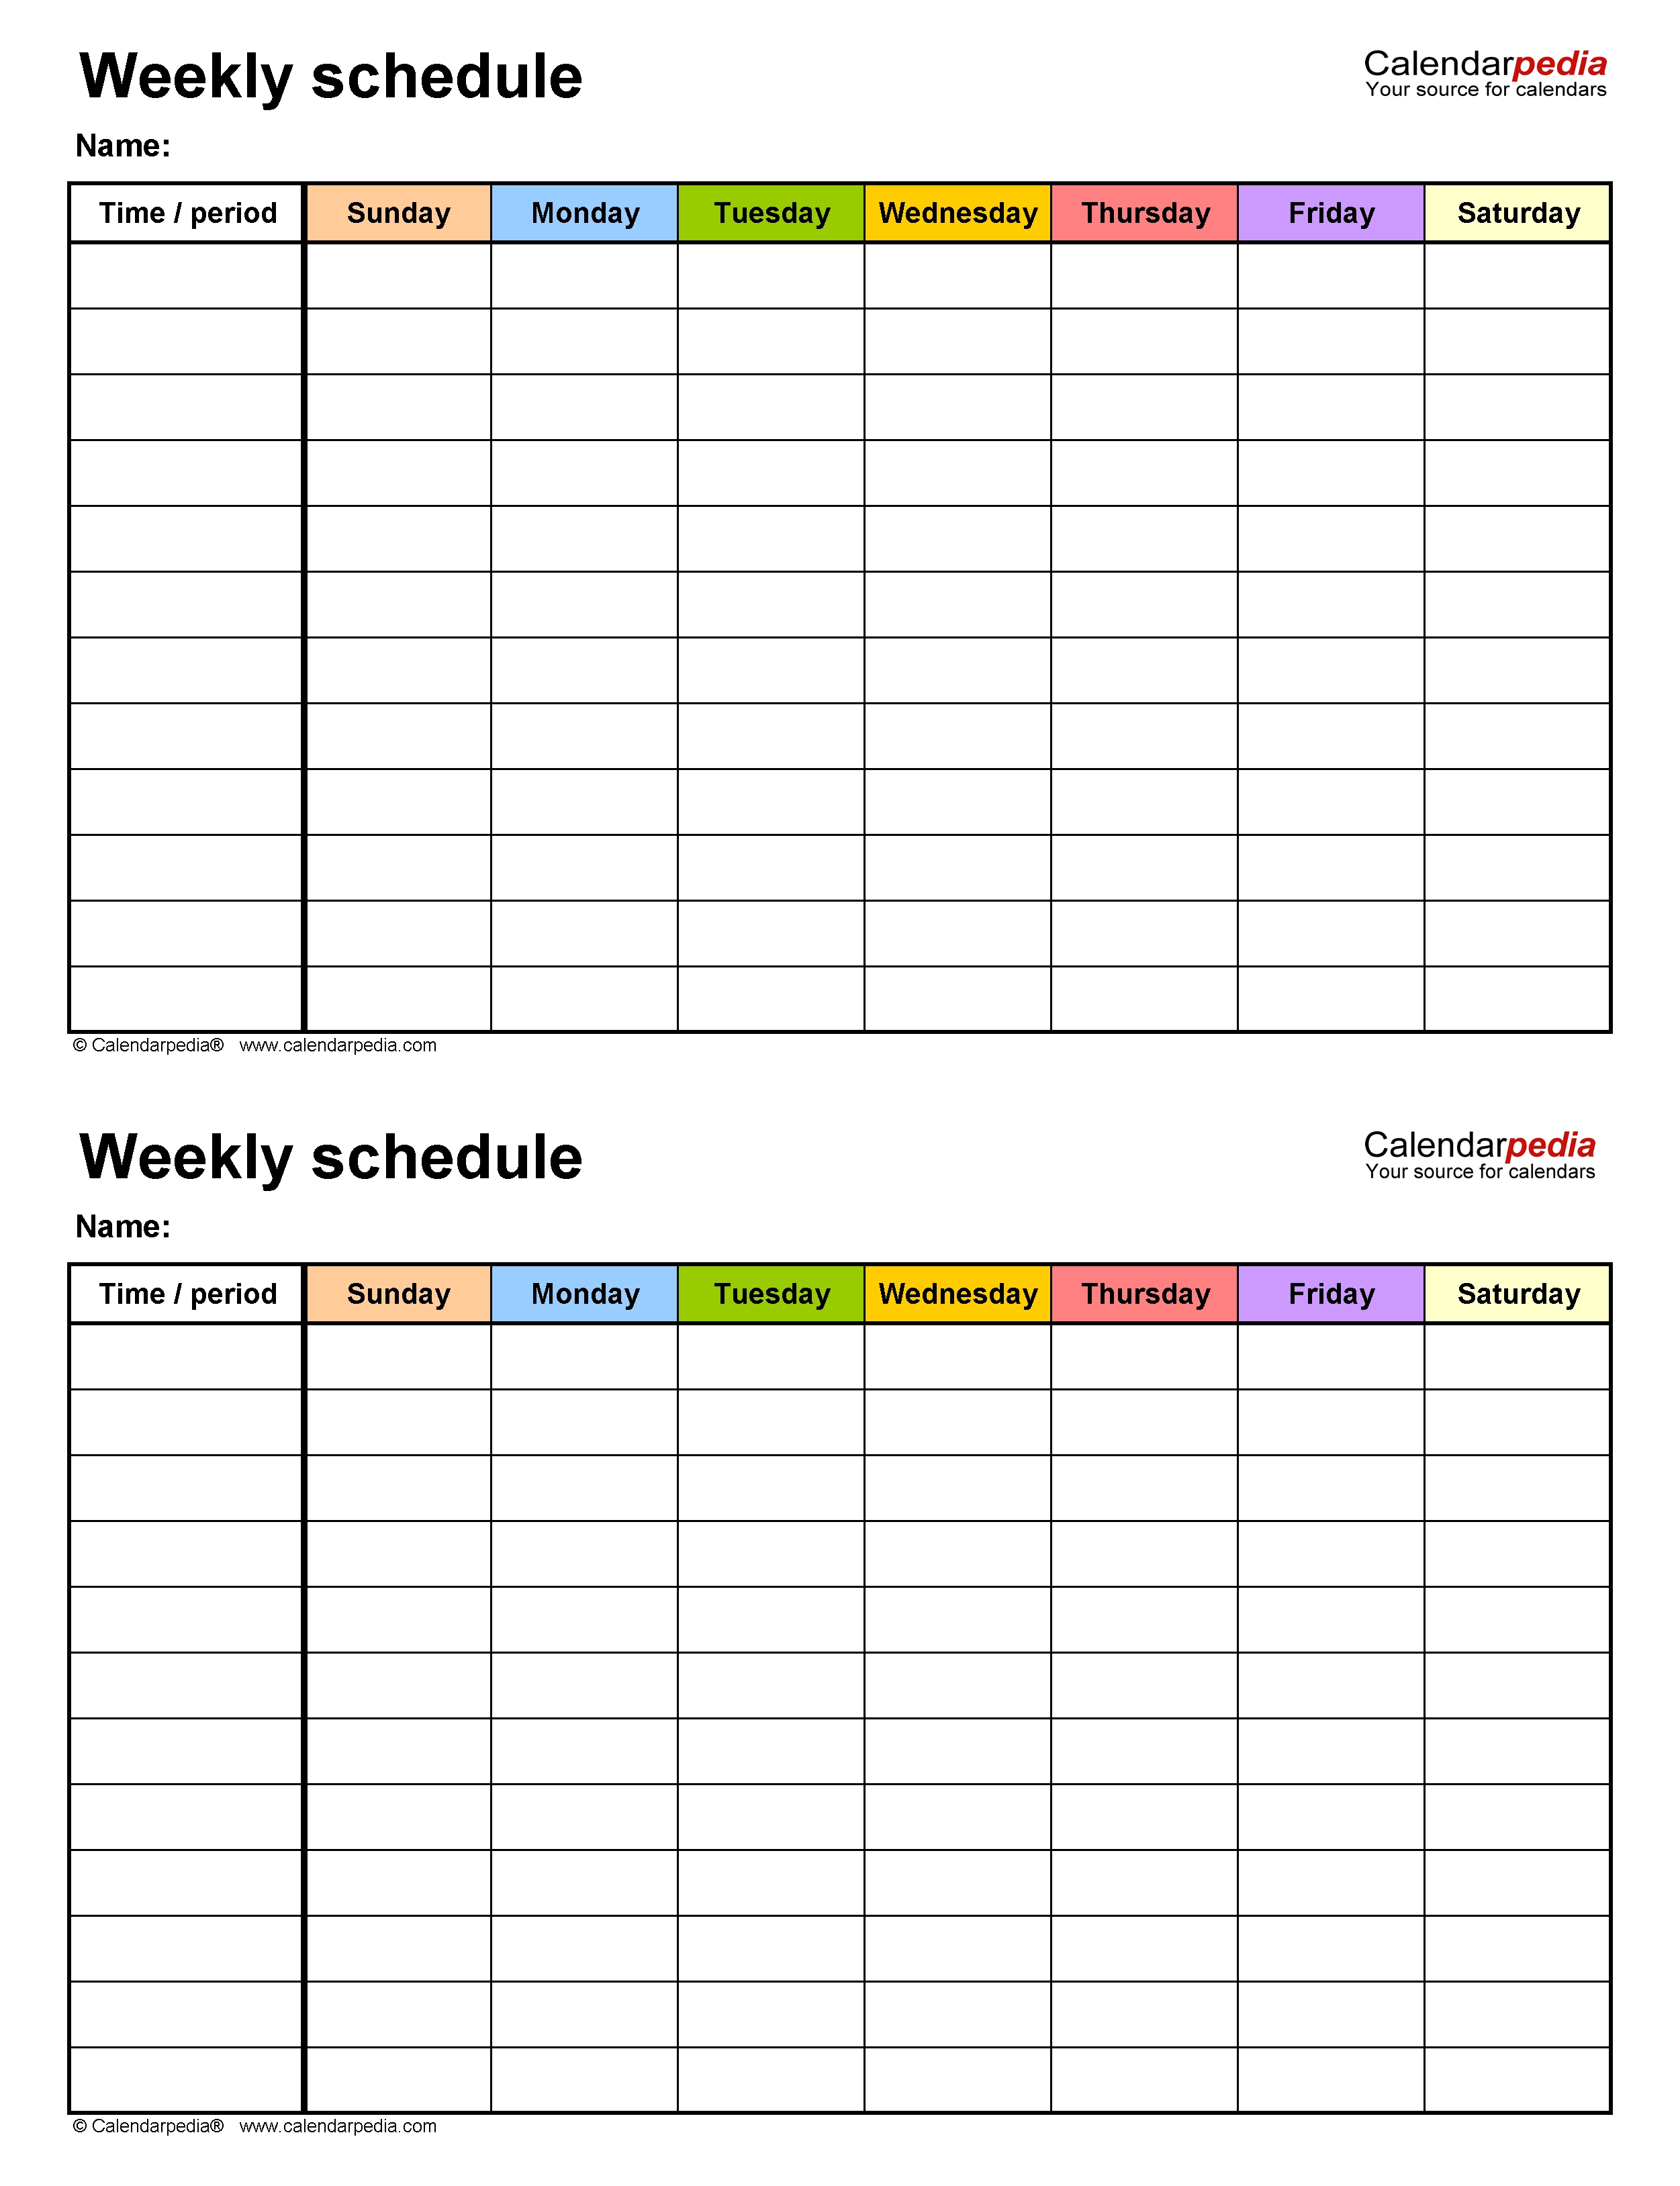 Free Weekly Schedules For Excel - 18 Templates 8 Week Calendar Template